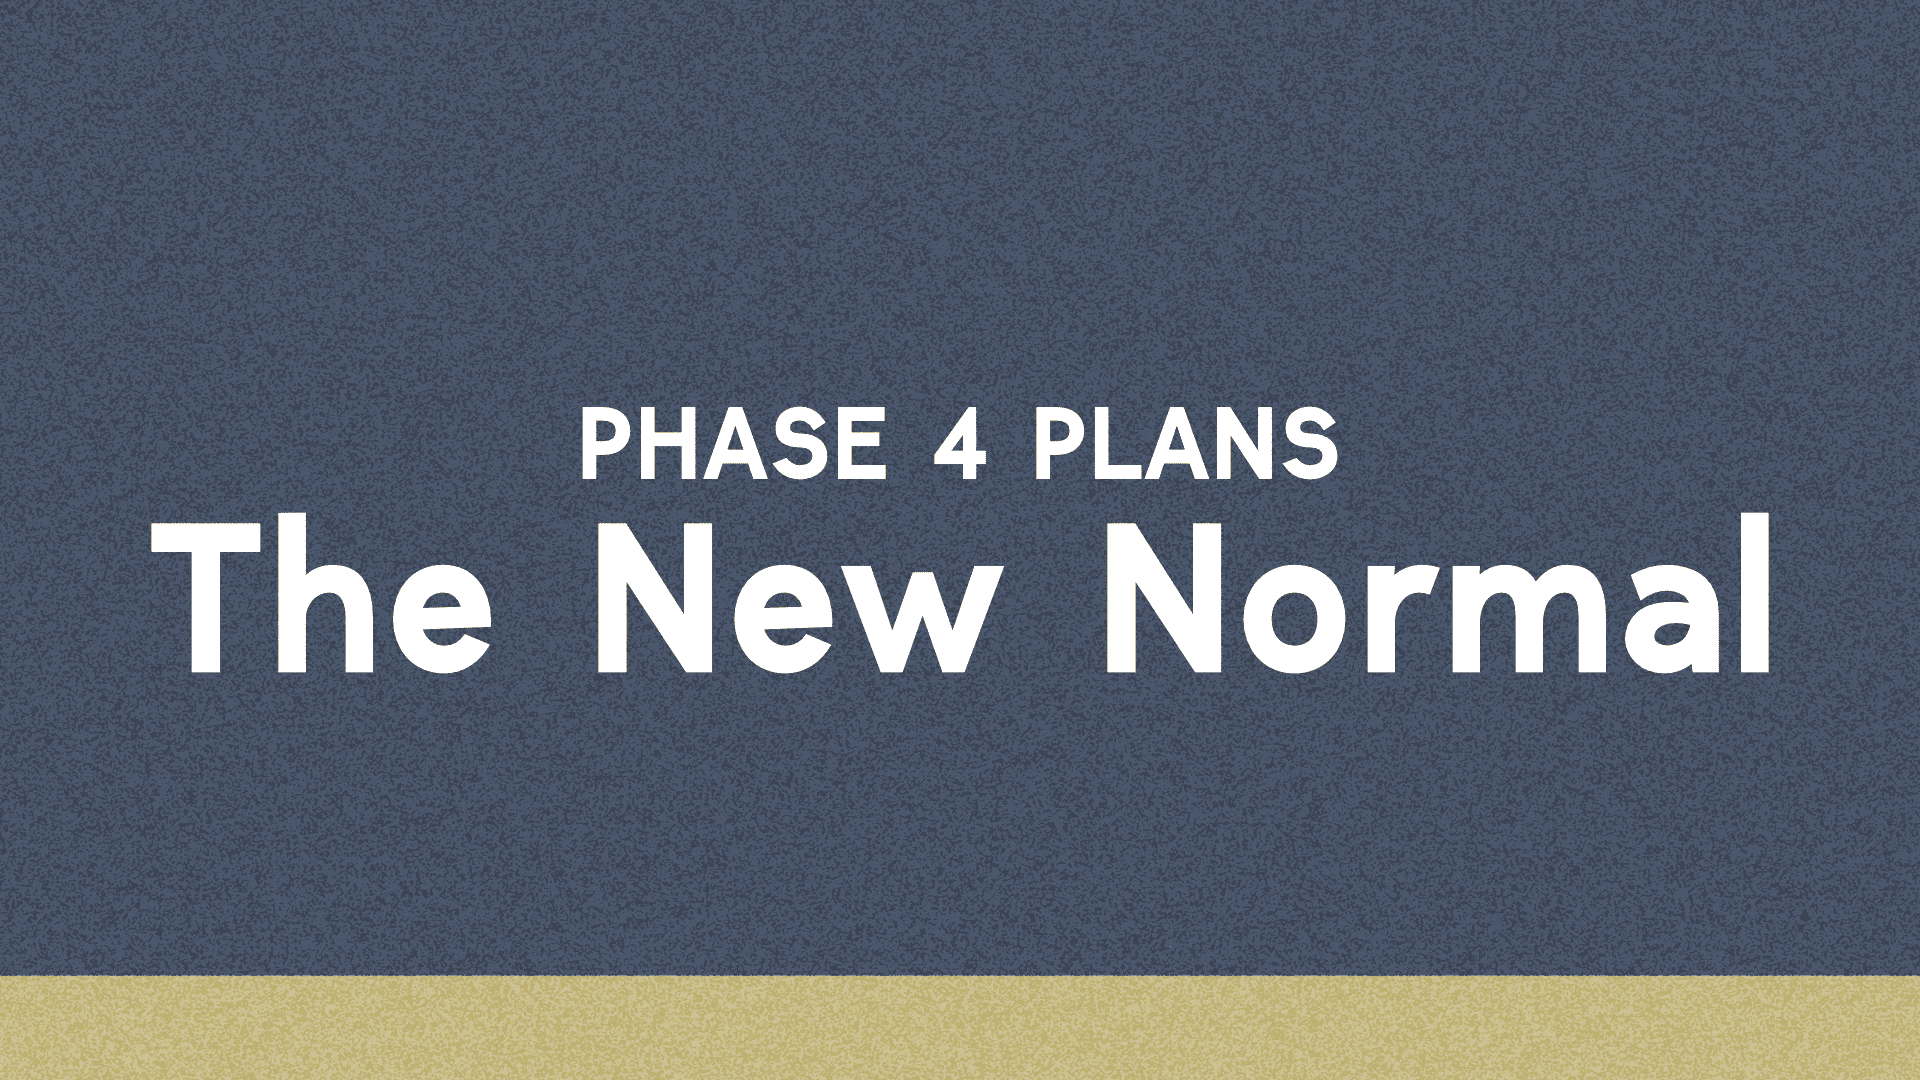 Phase 4 Plans [Fall 2020 Strategy]